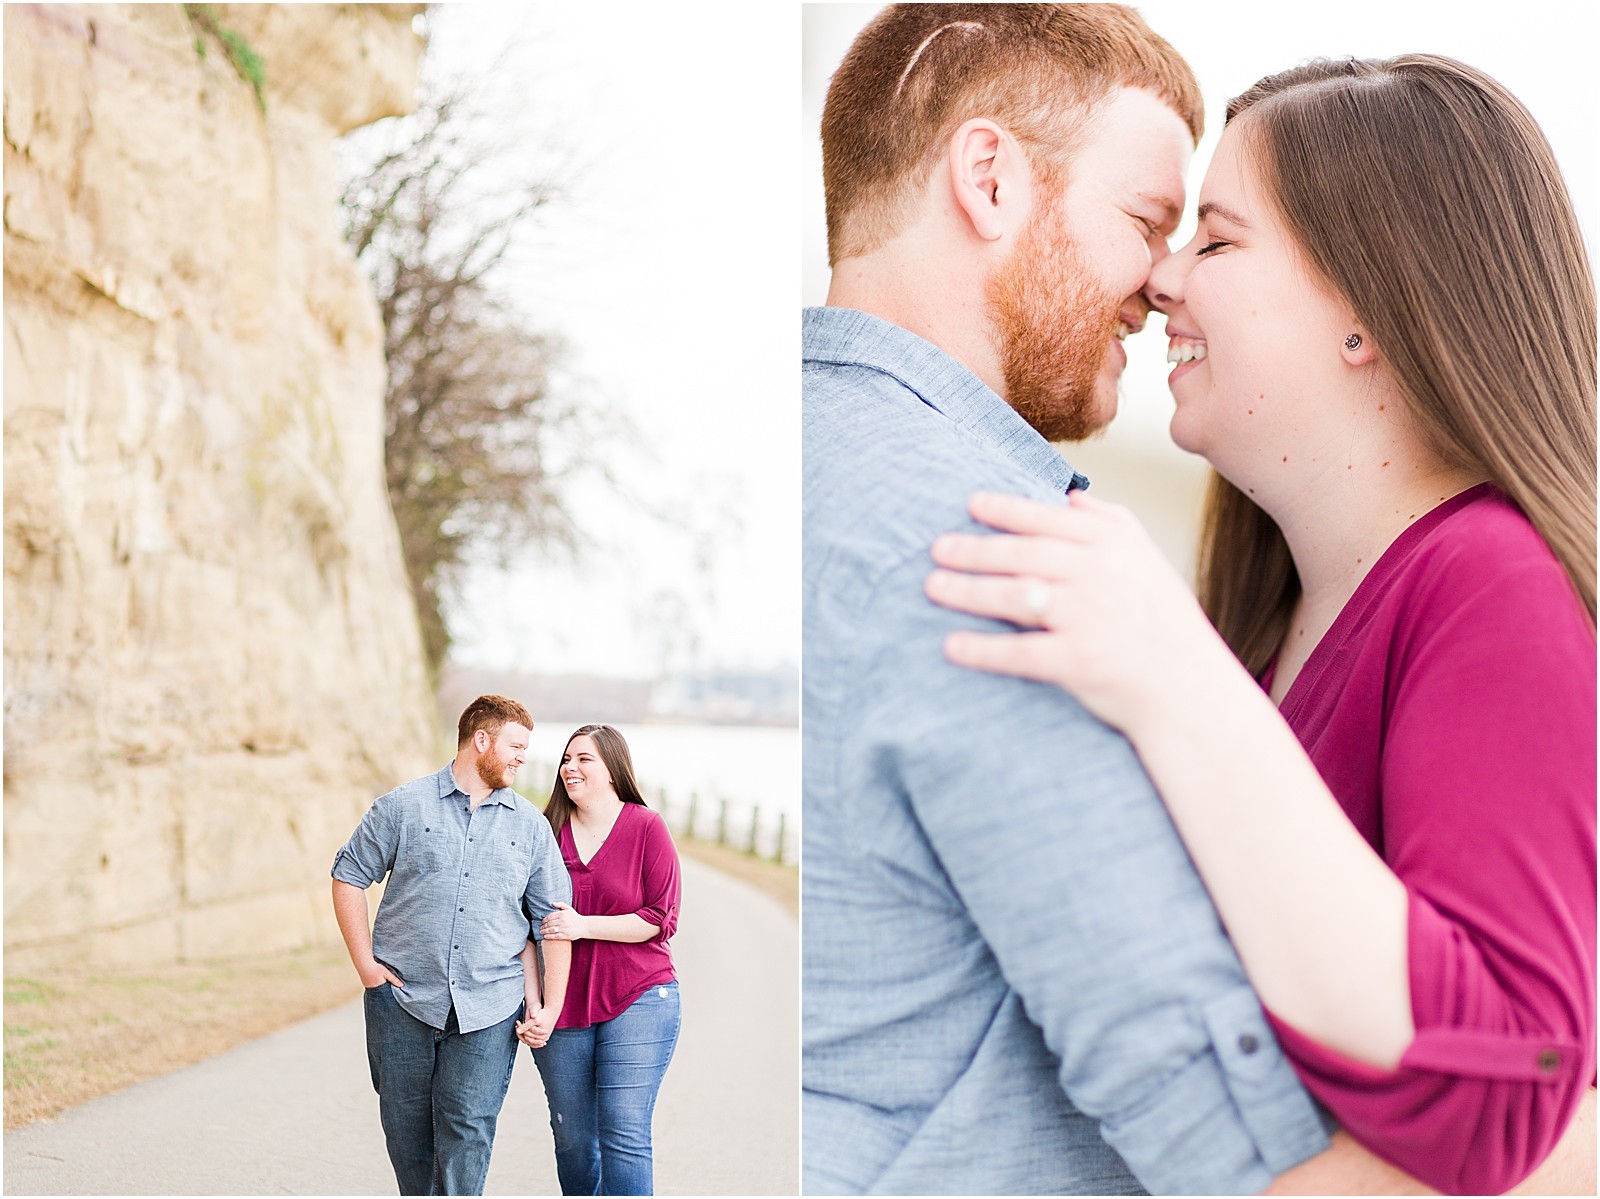 Jocelyn and Austin | Rockport Indiana Engament Session001.jpg